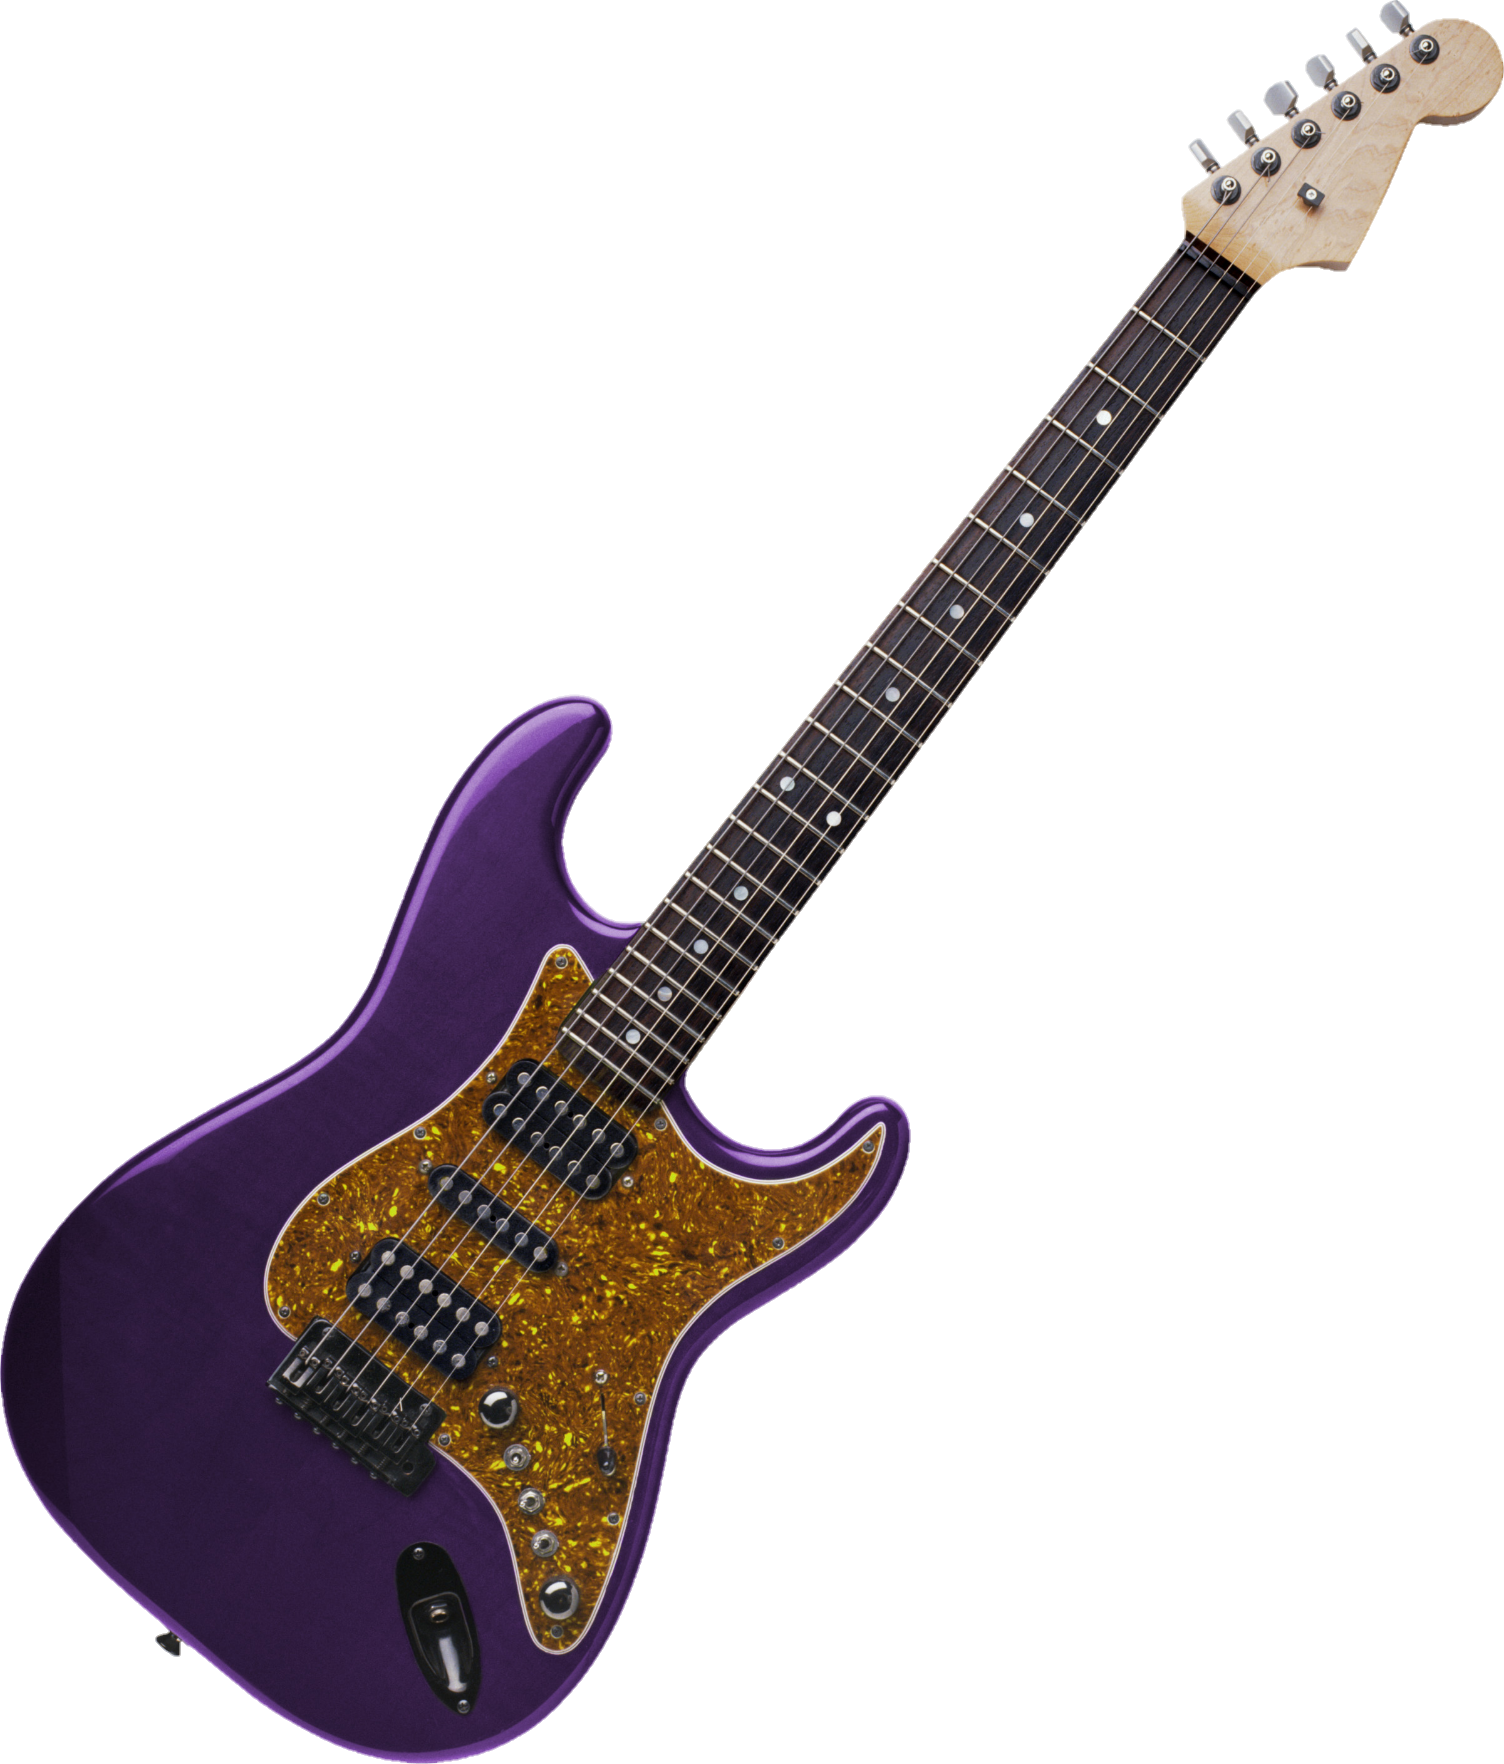 guitar-png-image-from-pngfre-20